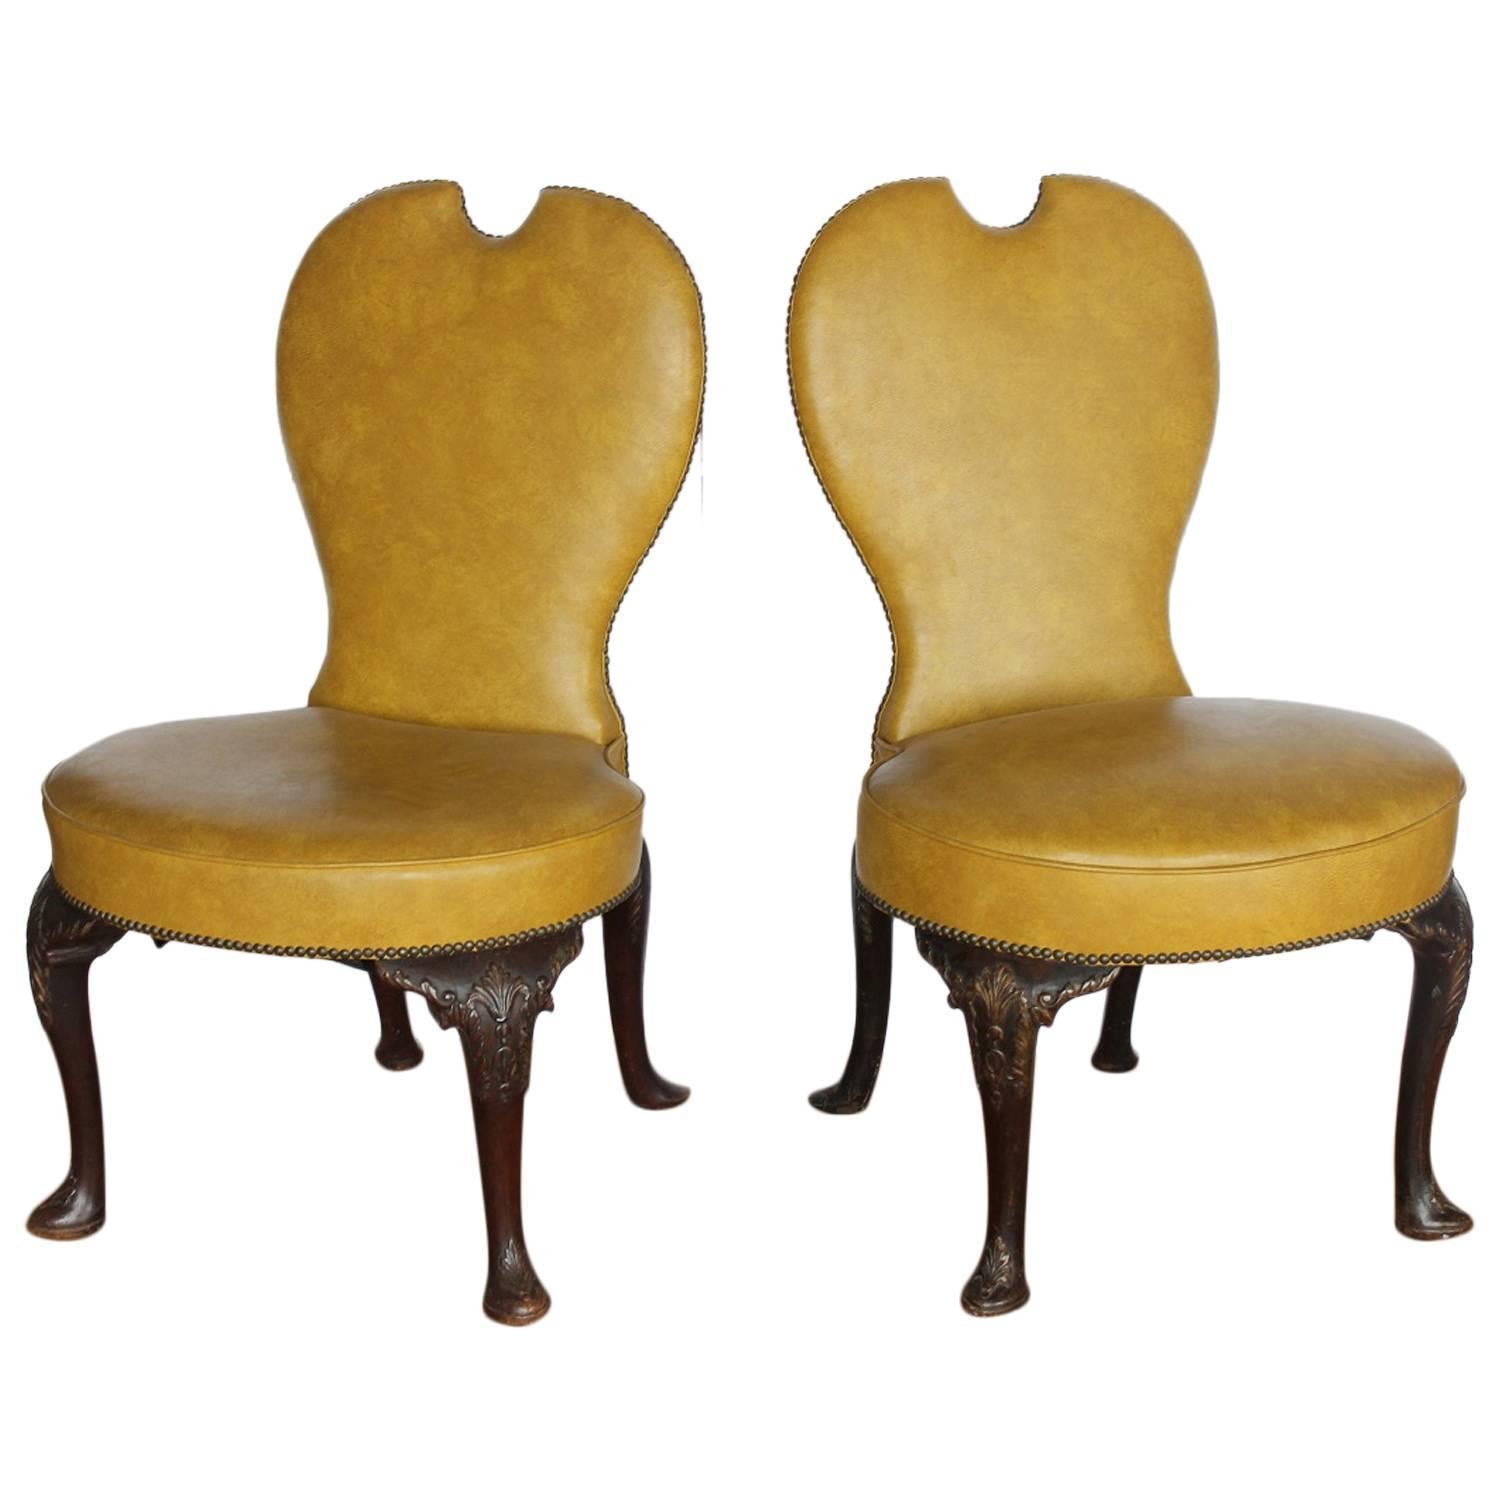 Stylish Pair of Early 20th Century American Library Chairs For Sale